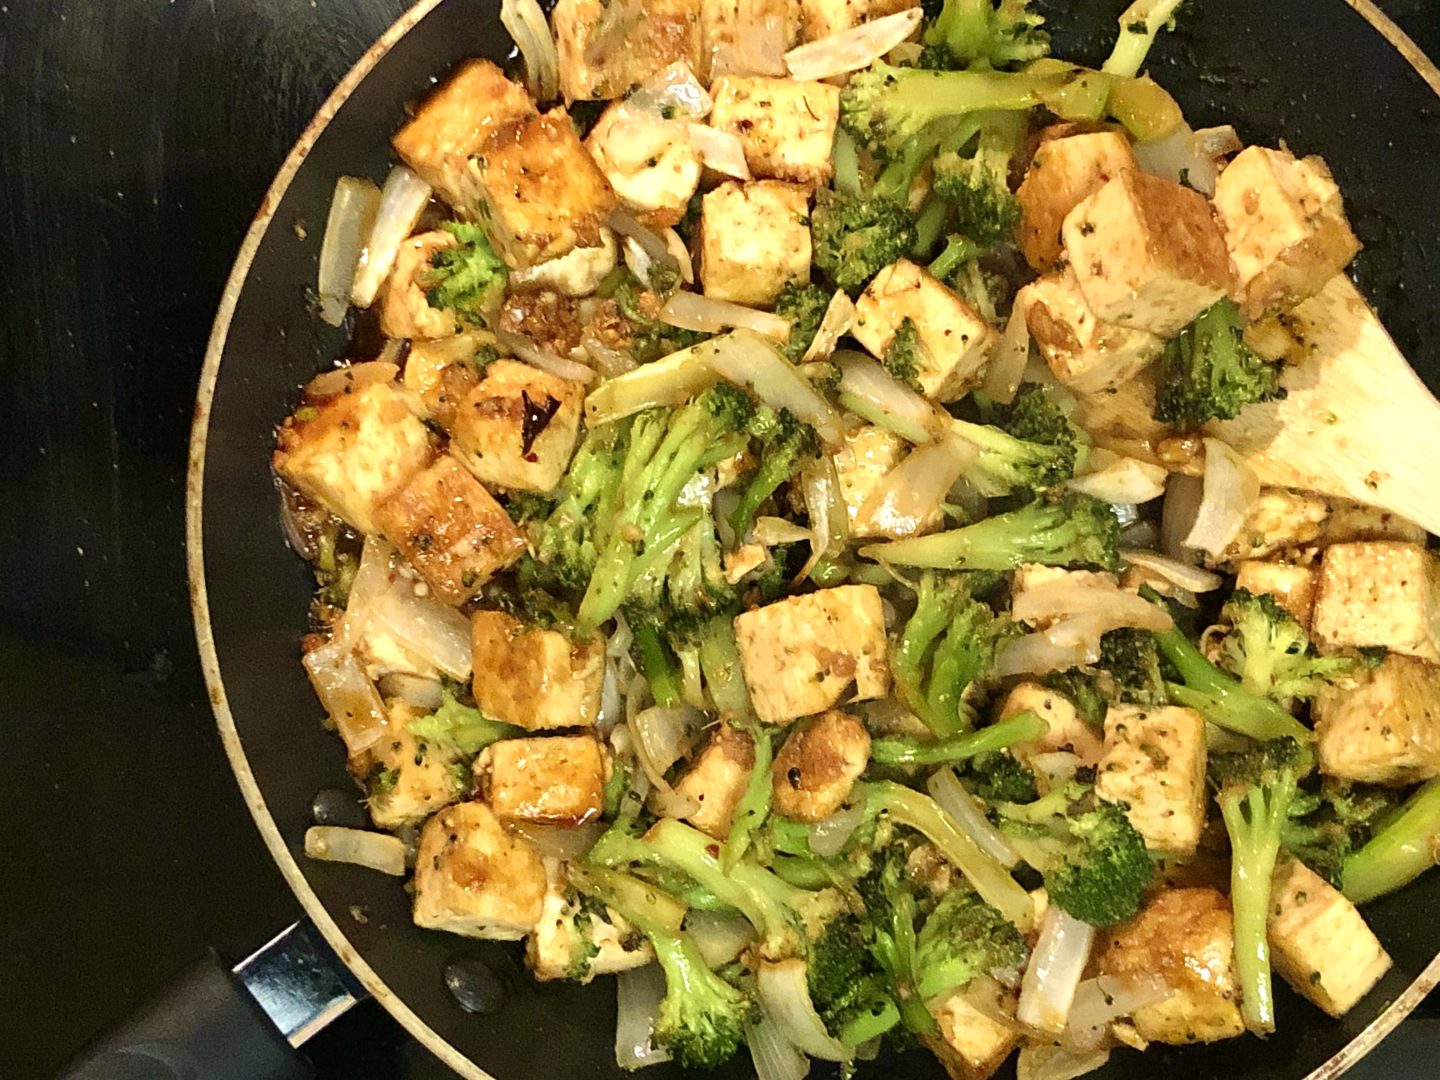 Homemade Chinese Takeout Healthy Recipe - Corporate Fitness Works